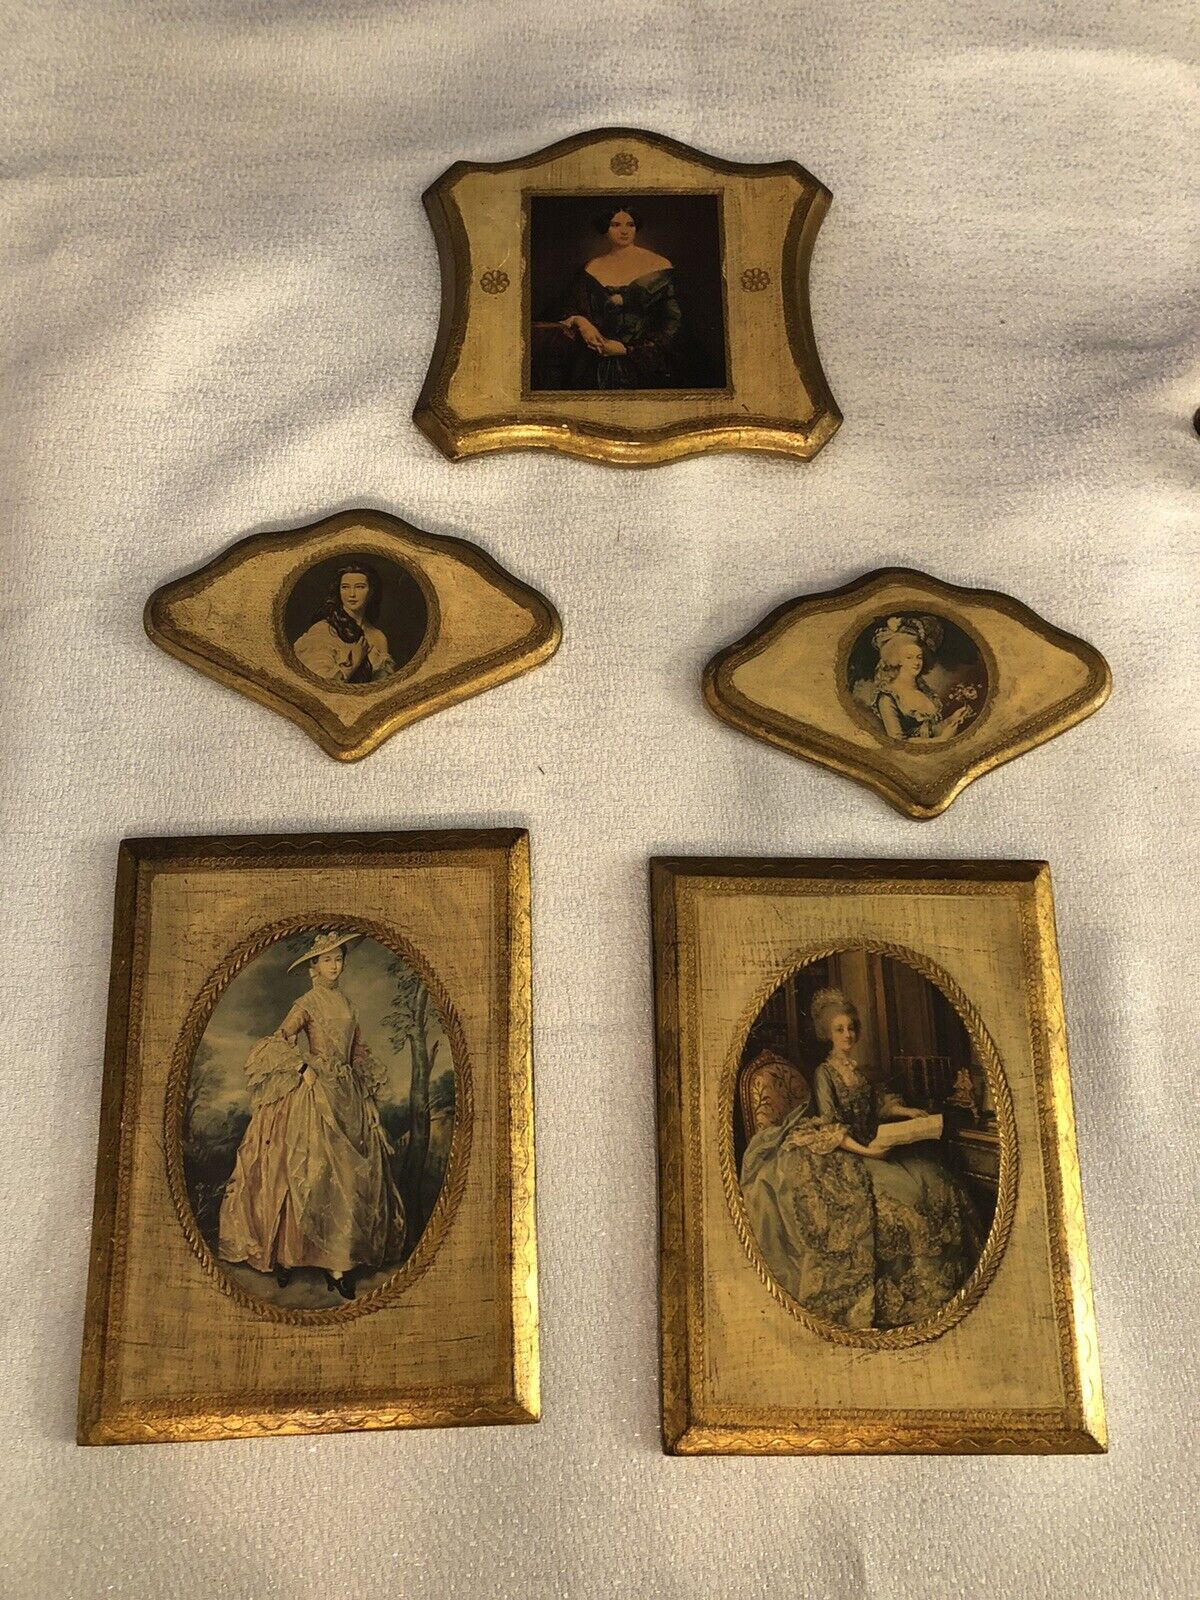 VTG Made in Italy 5 Small Rococo Artwork Stamp on Wood Base